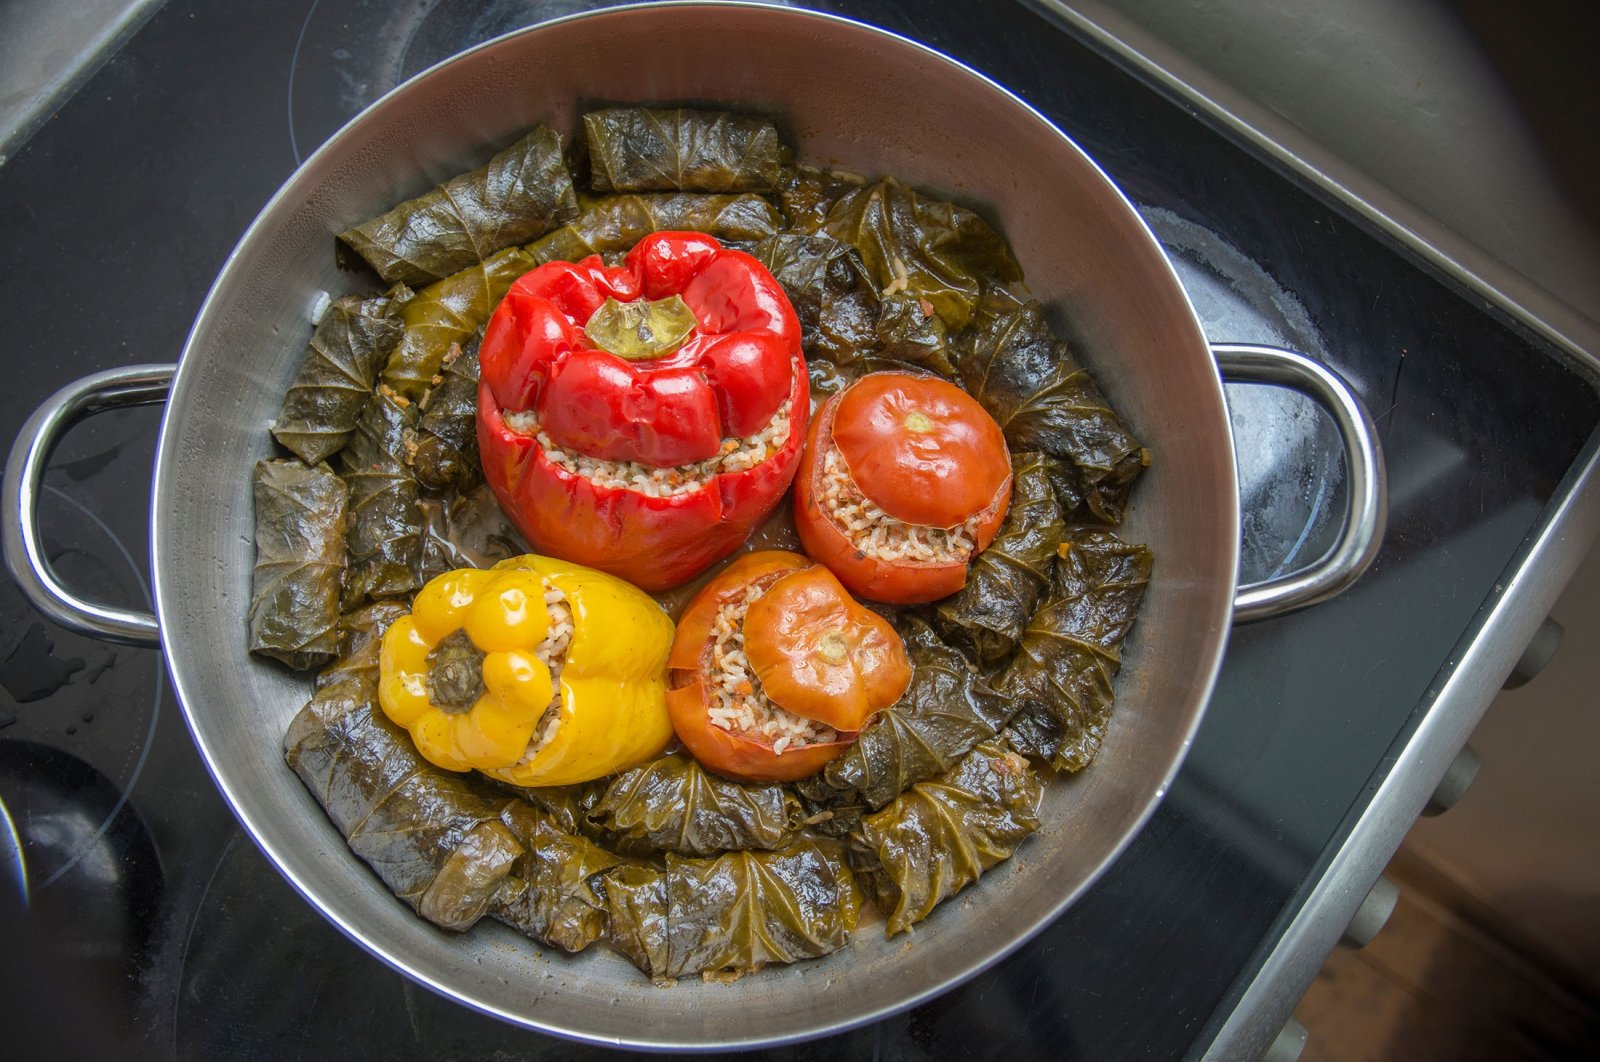 Stuffed vegetables and sarma, or grape leaves with rice. (Shutterstock Photo)